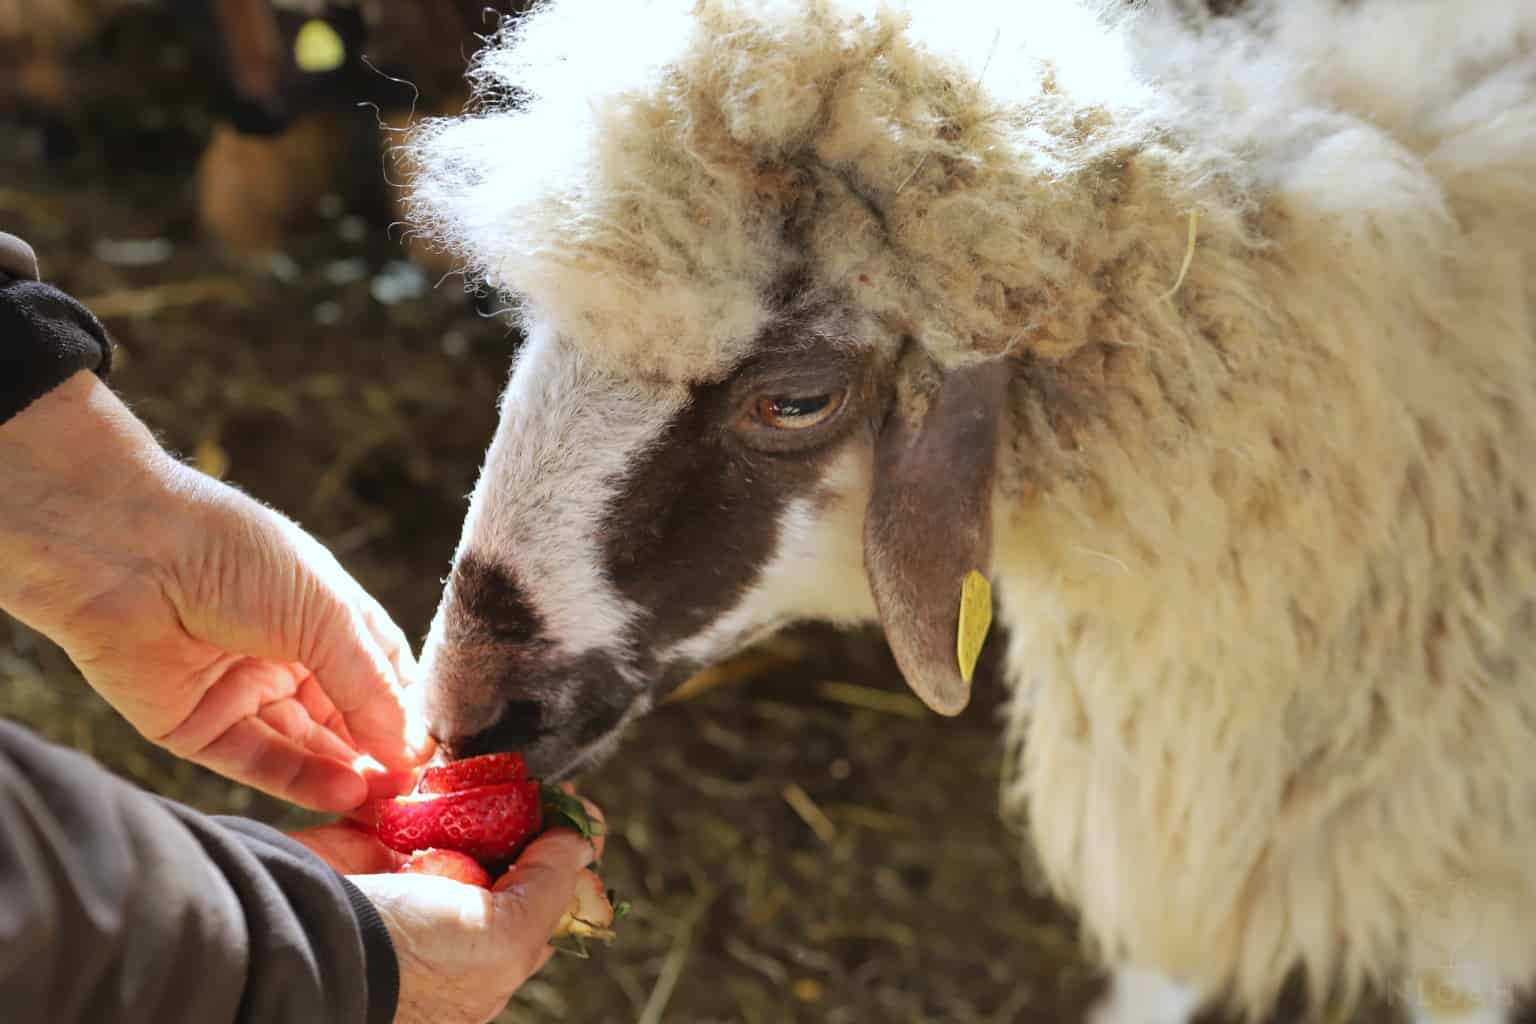 a sheep trying some strawberries